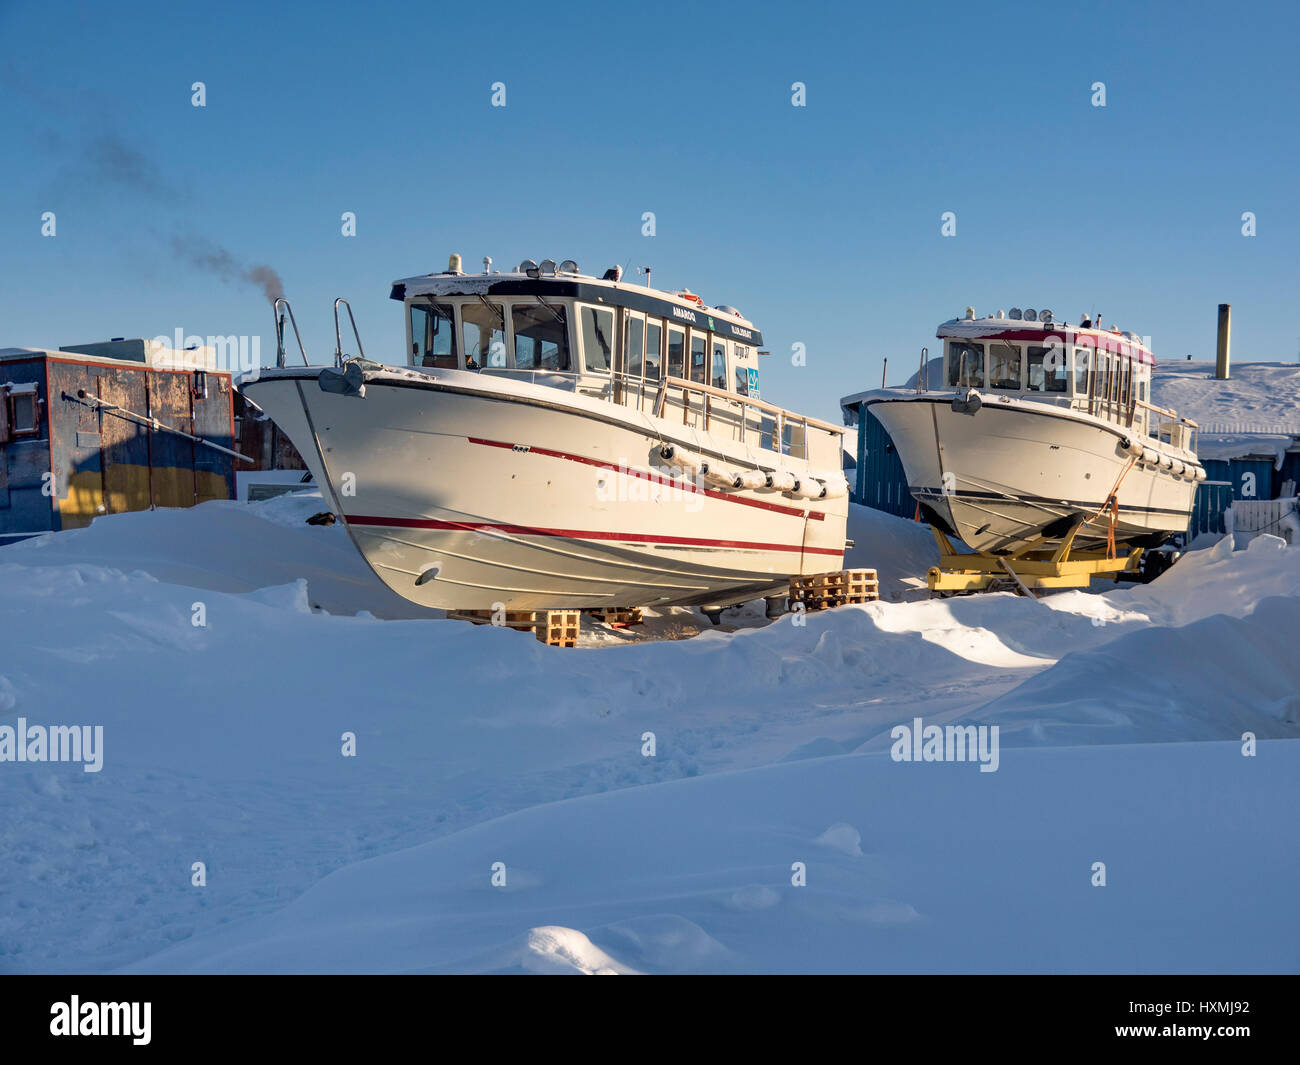 Boats parked for the winter in the owner's front garden in Ilulissat town, west Greenland Stock Photo